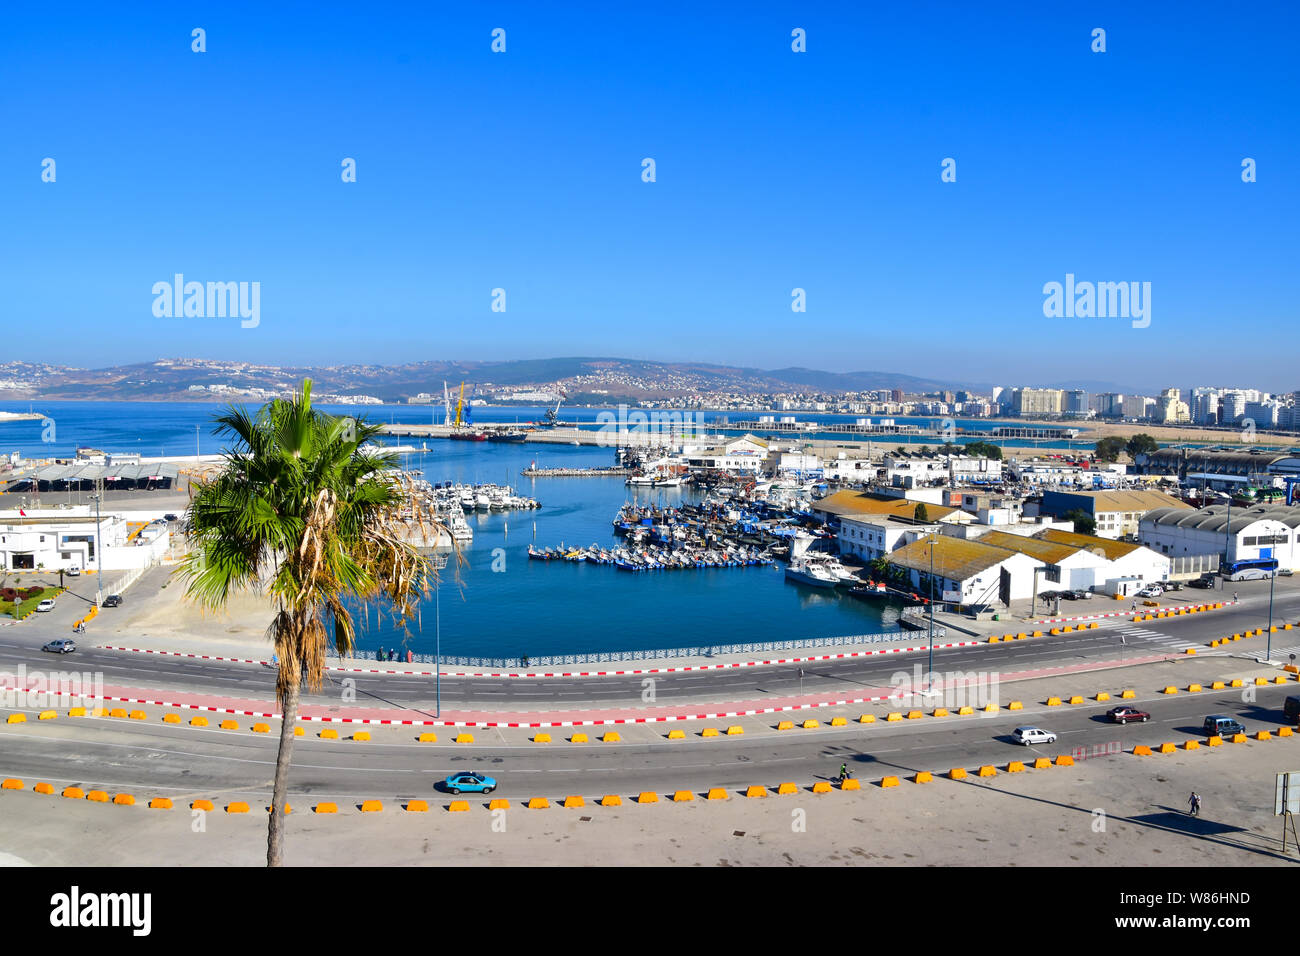 Port of Tangier, Tangier, Morocco, North Africa Stock Photo